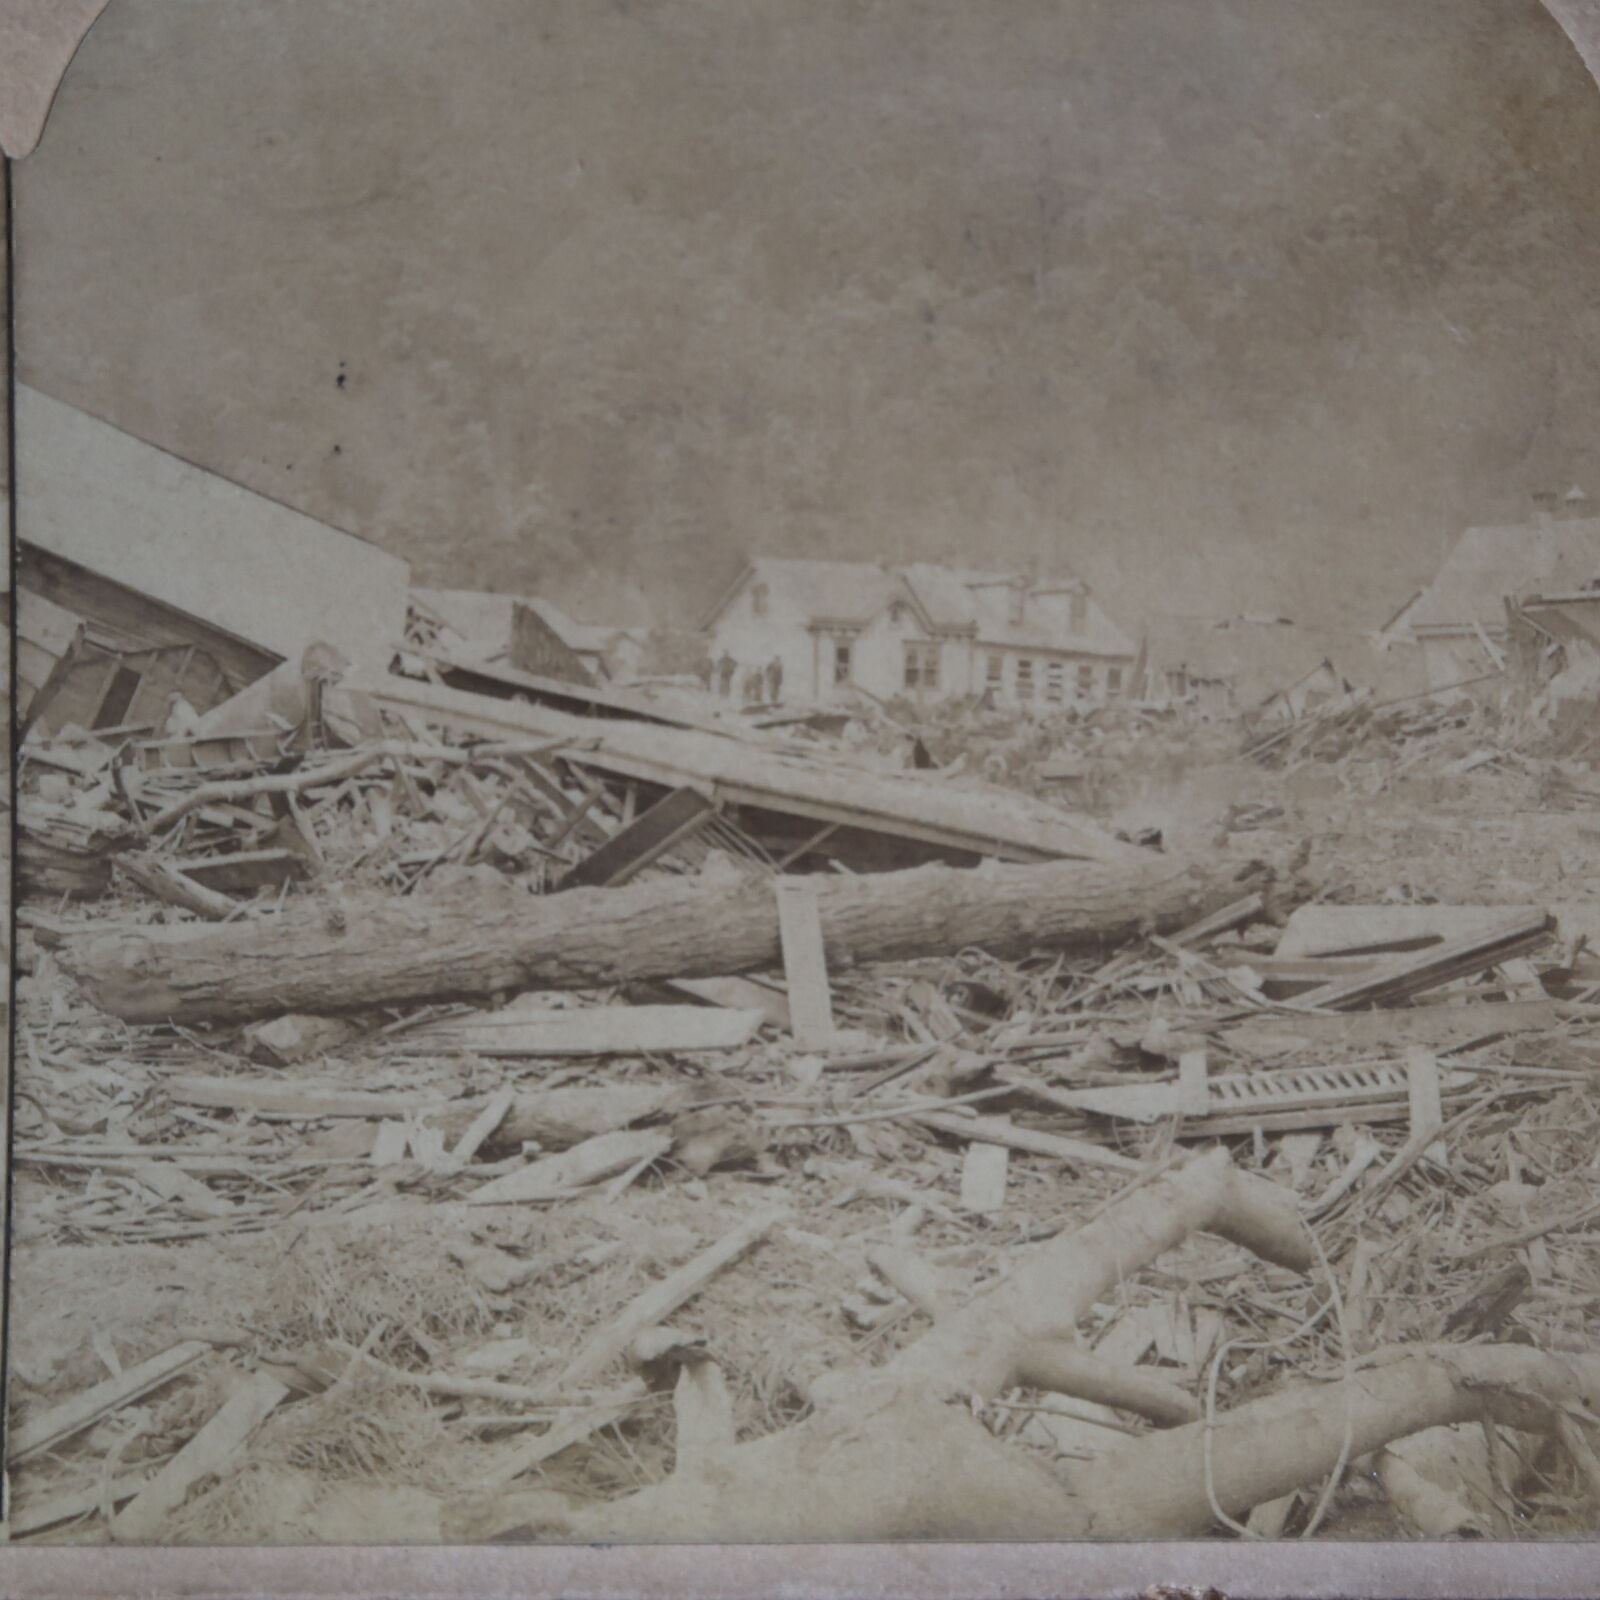 1889 Great Johnstown Flood 2209 Deaths May 31,1889 Disaster Stereoview A5